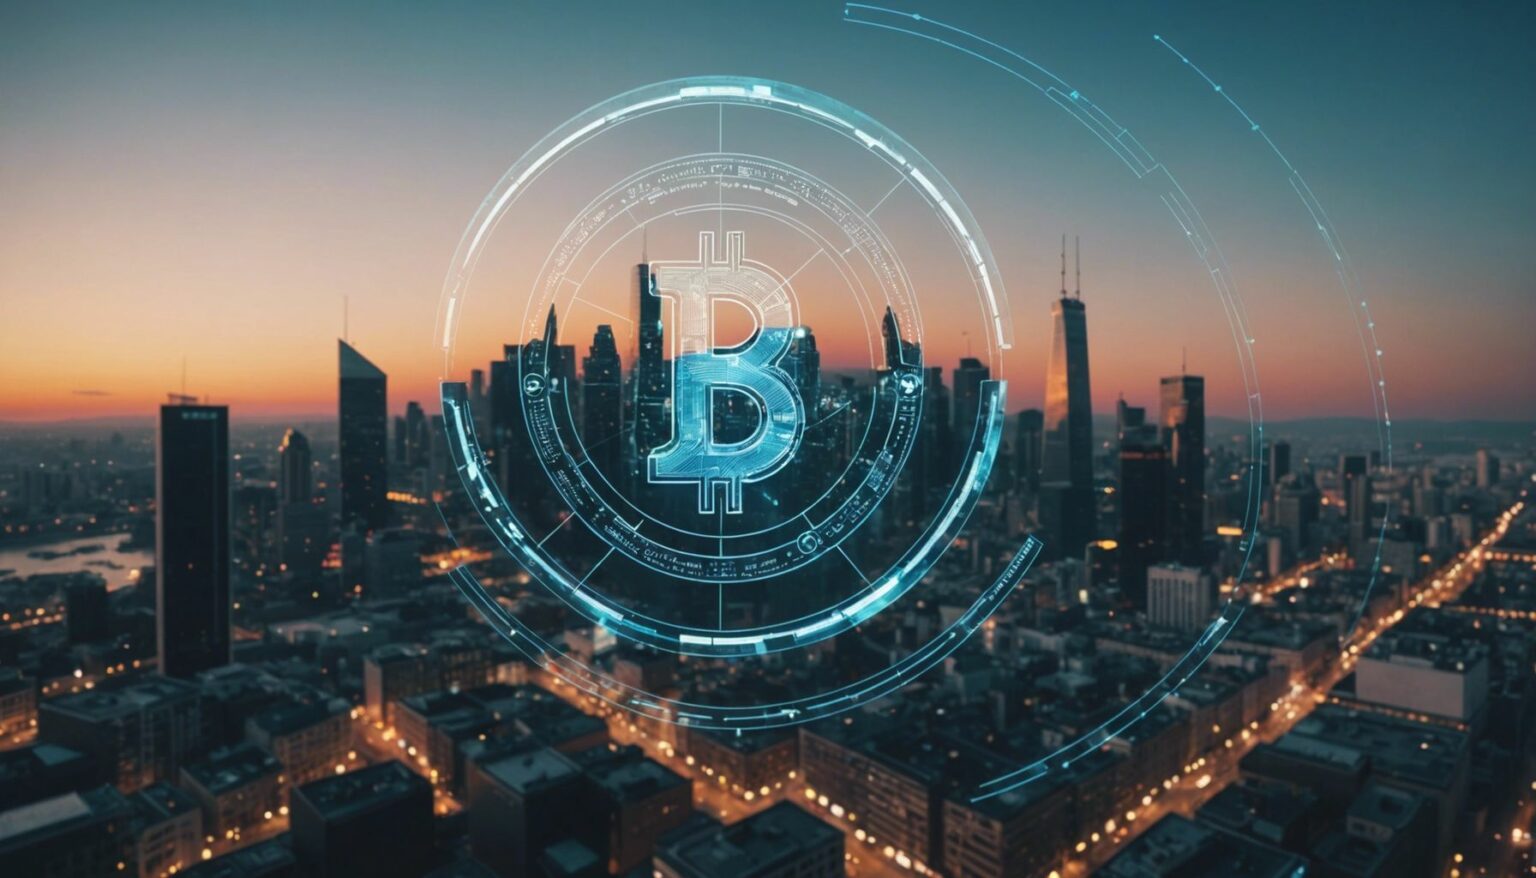 Futuristic city with floating digital currency symbols, highlighting upcoming crypto projects in 2023.